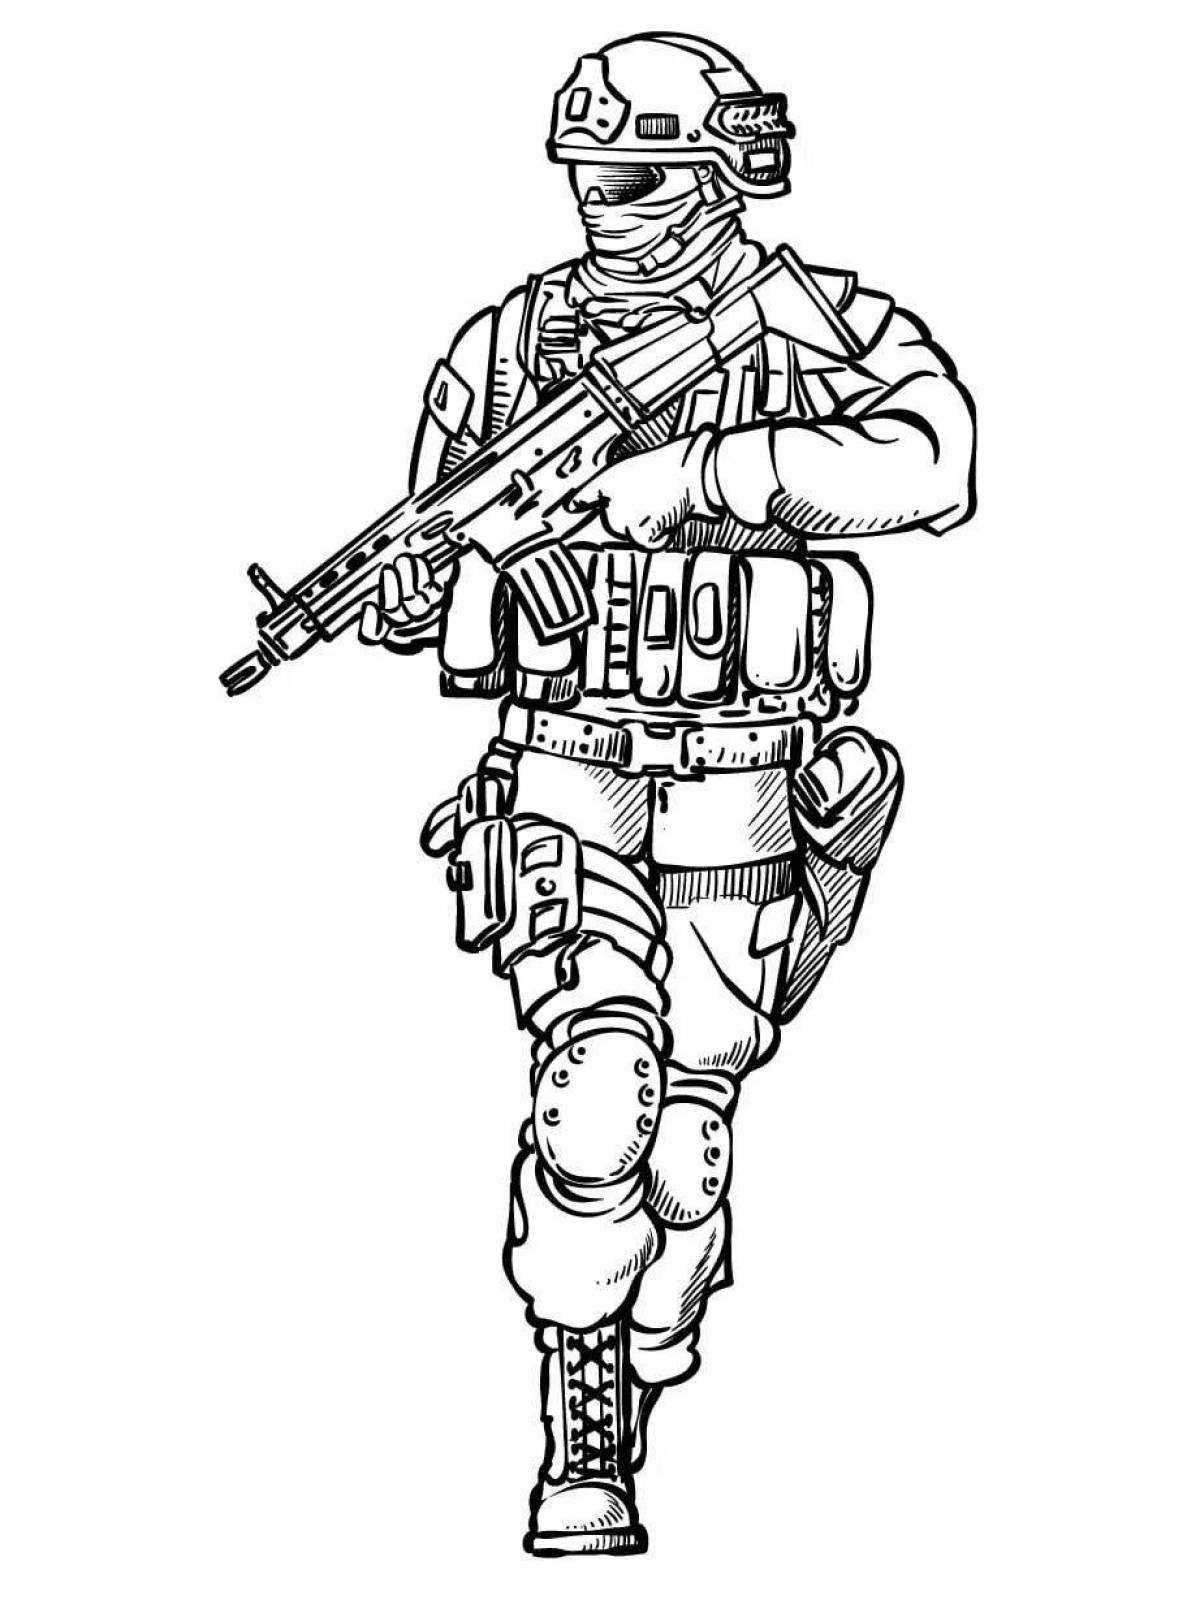 Adorable soldier coloring page for kids